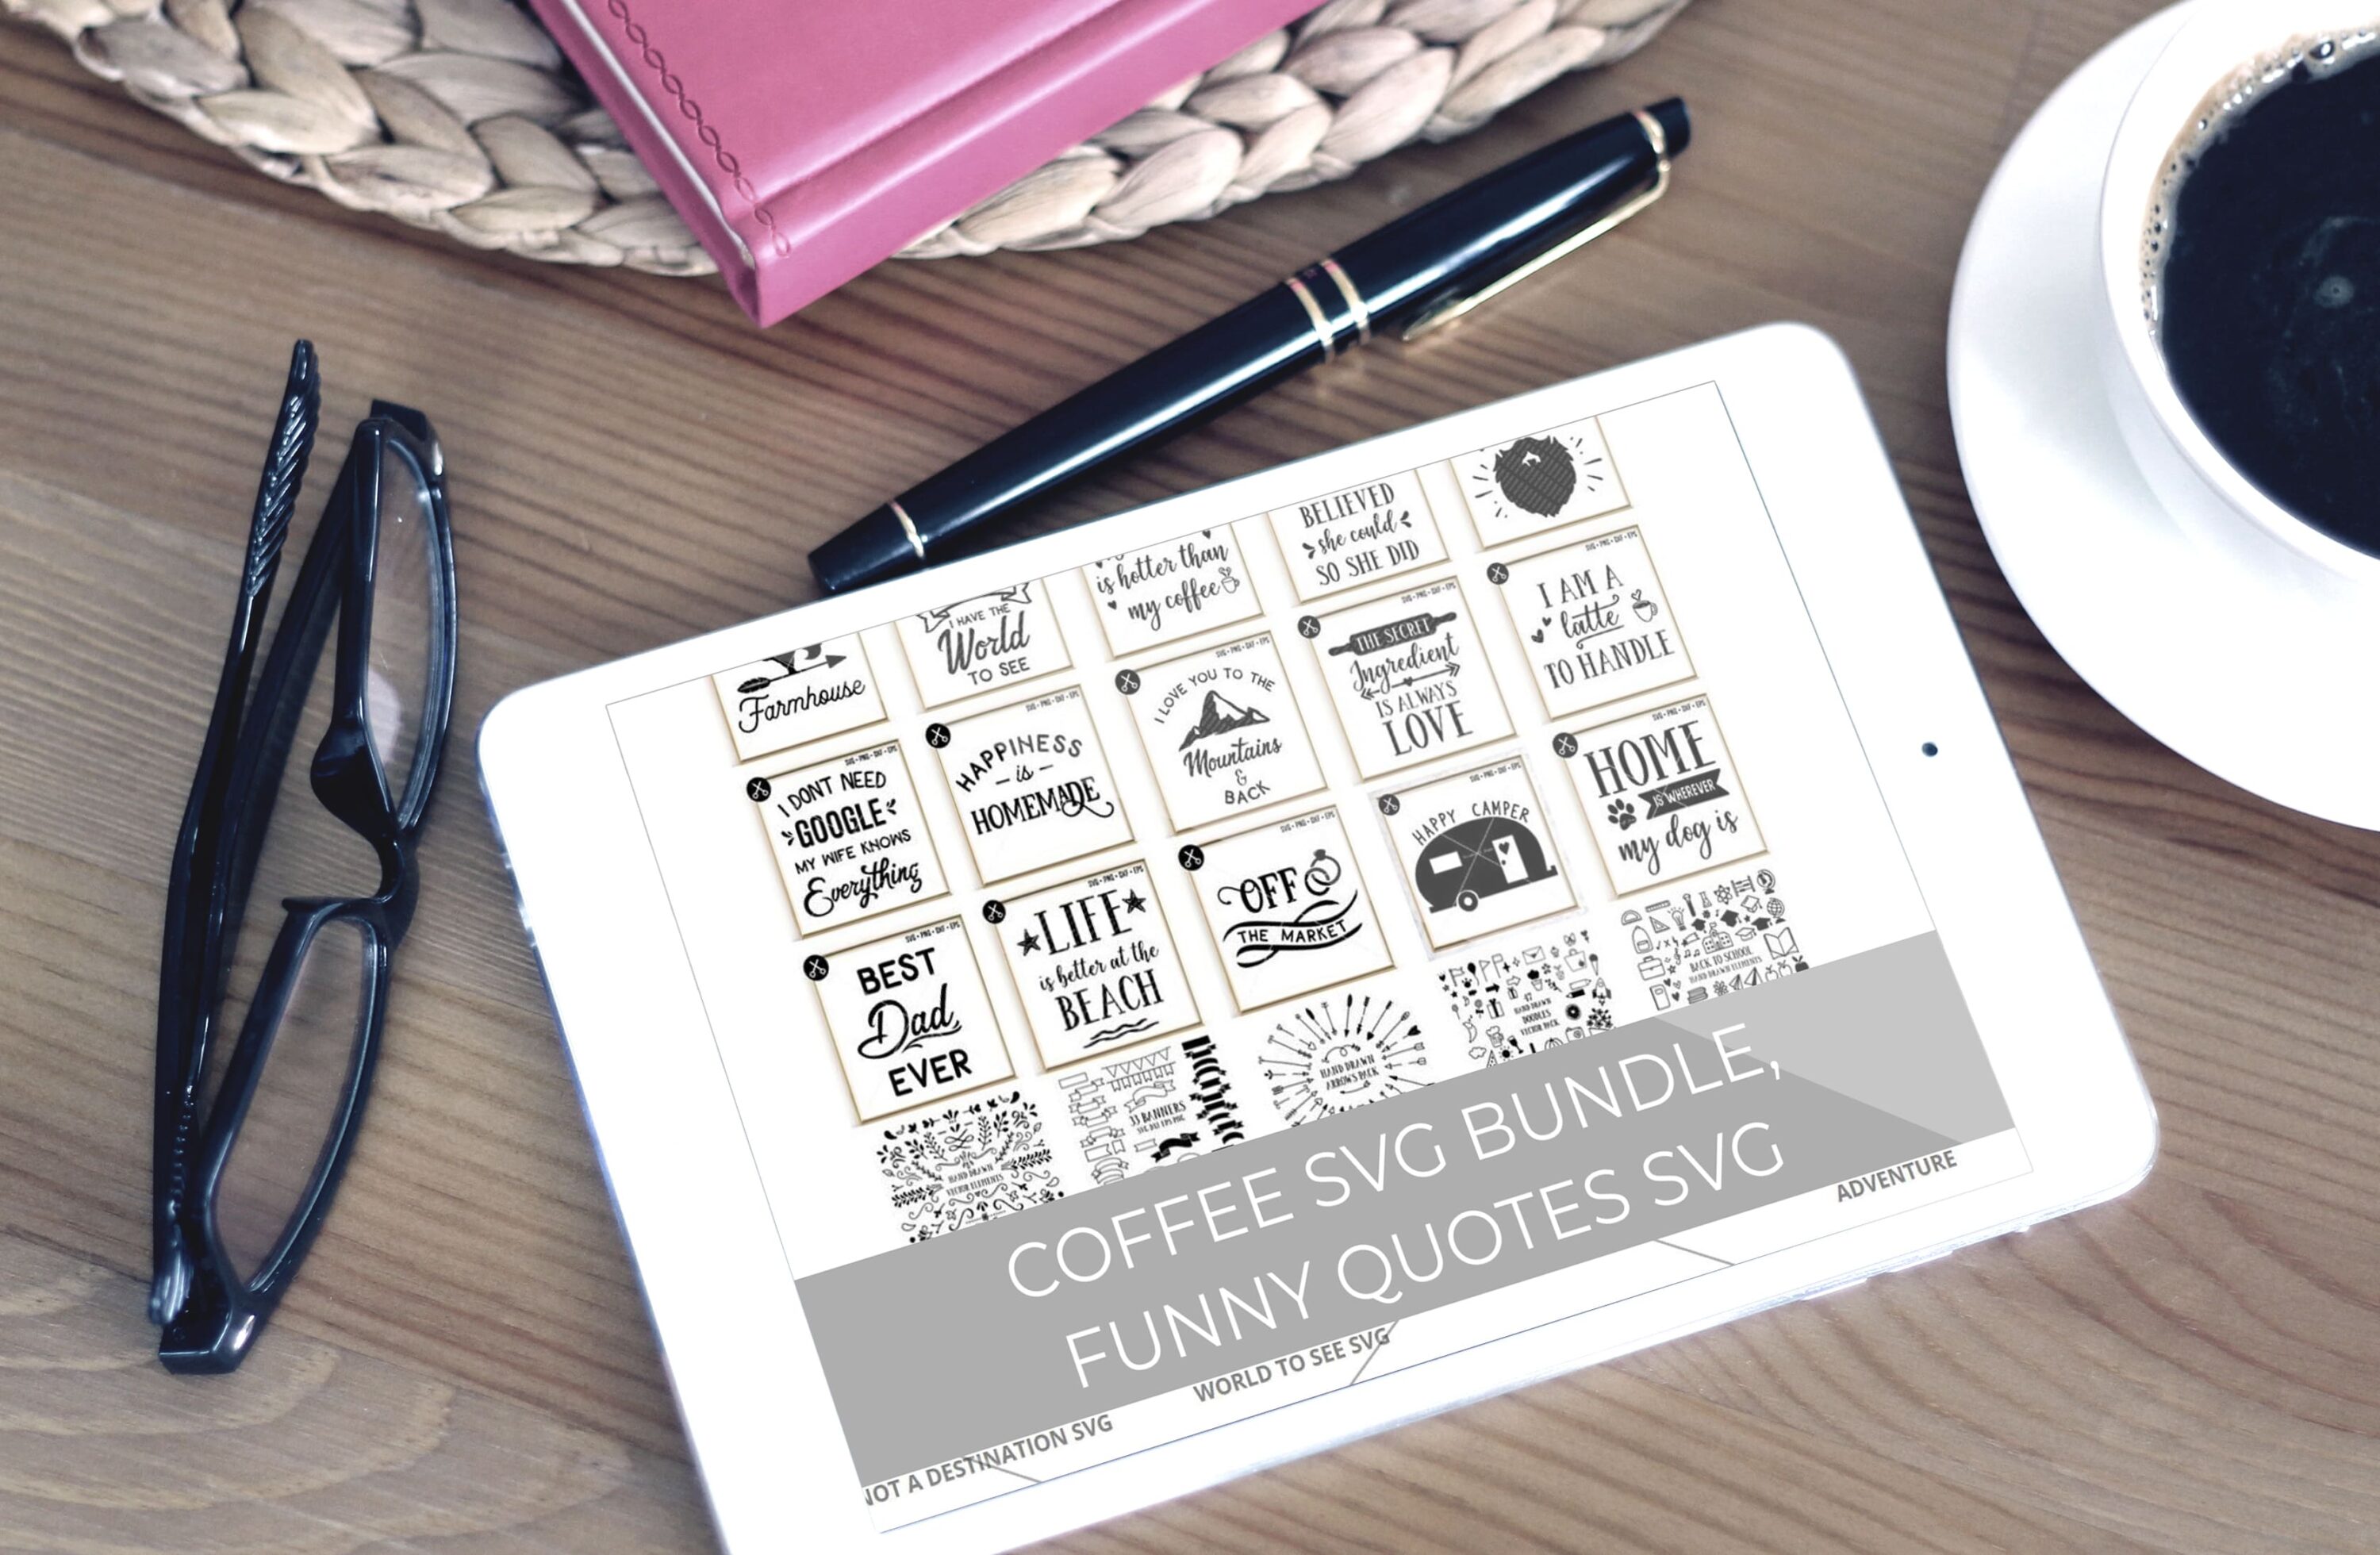 Tablet - Coffee SVG Bundle, funny quotes svg.